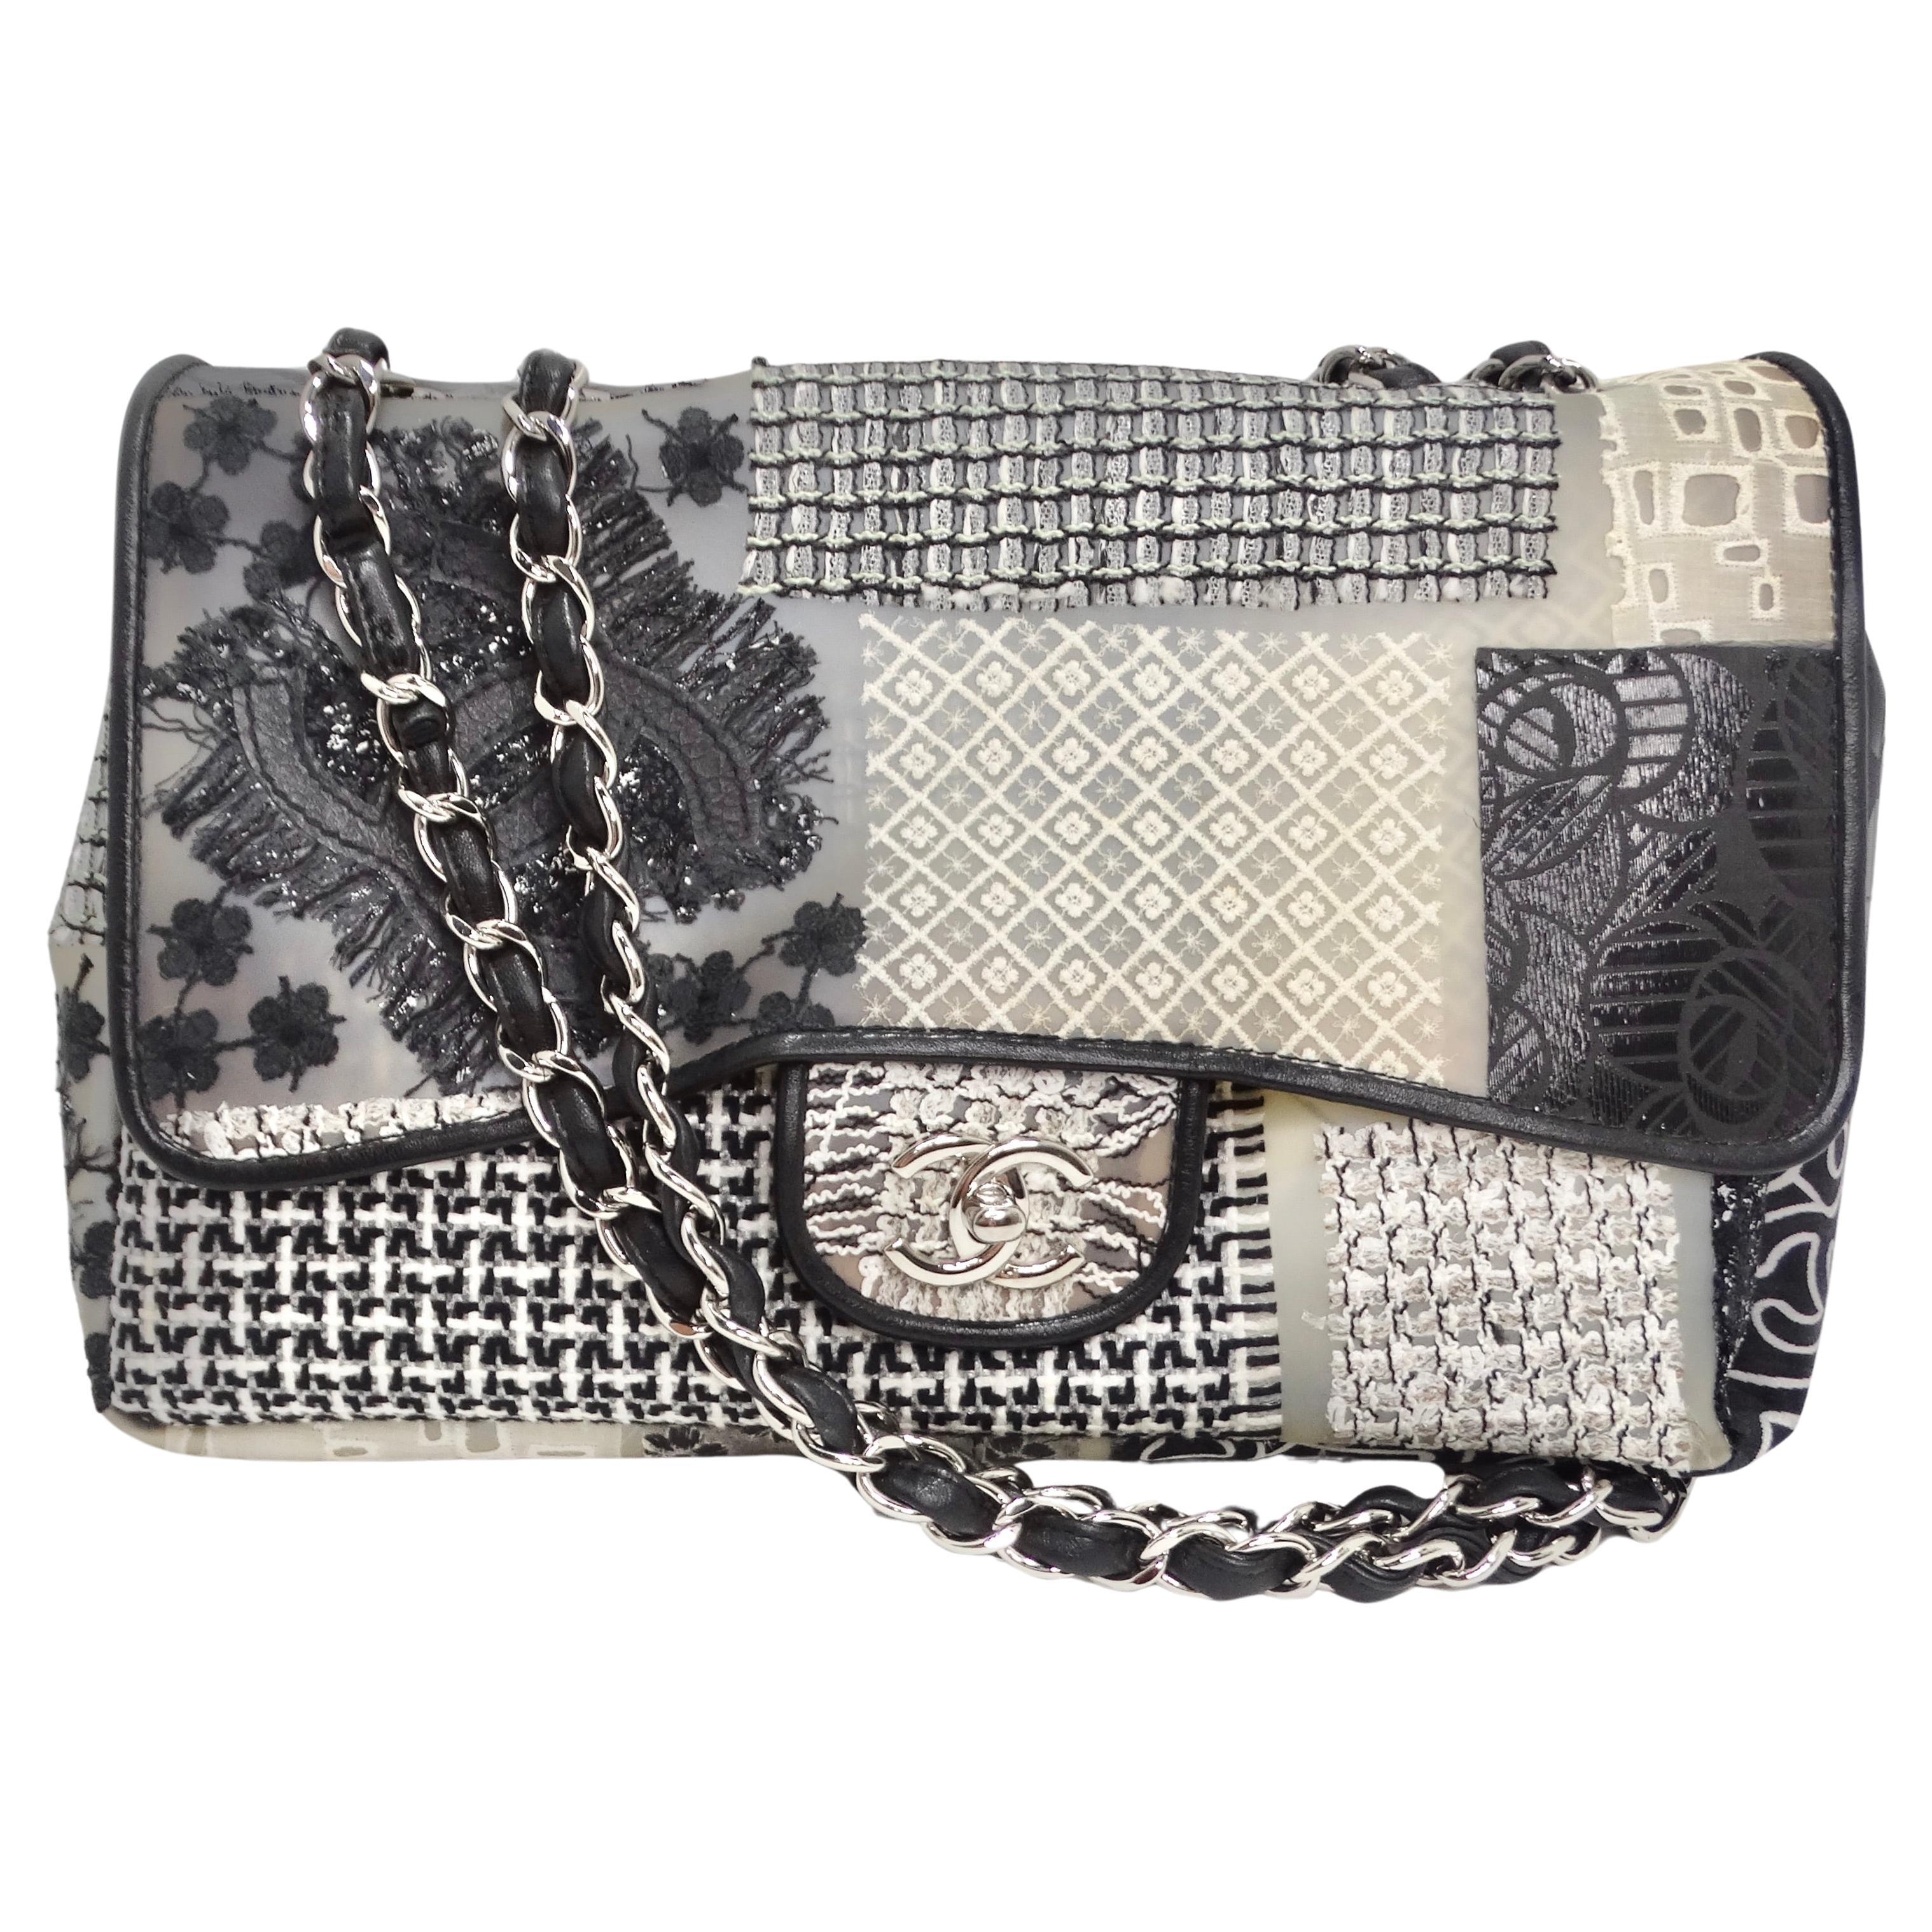 80's Fifth Avenue Handbags - Black and Gray Patchwork Leather